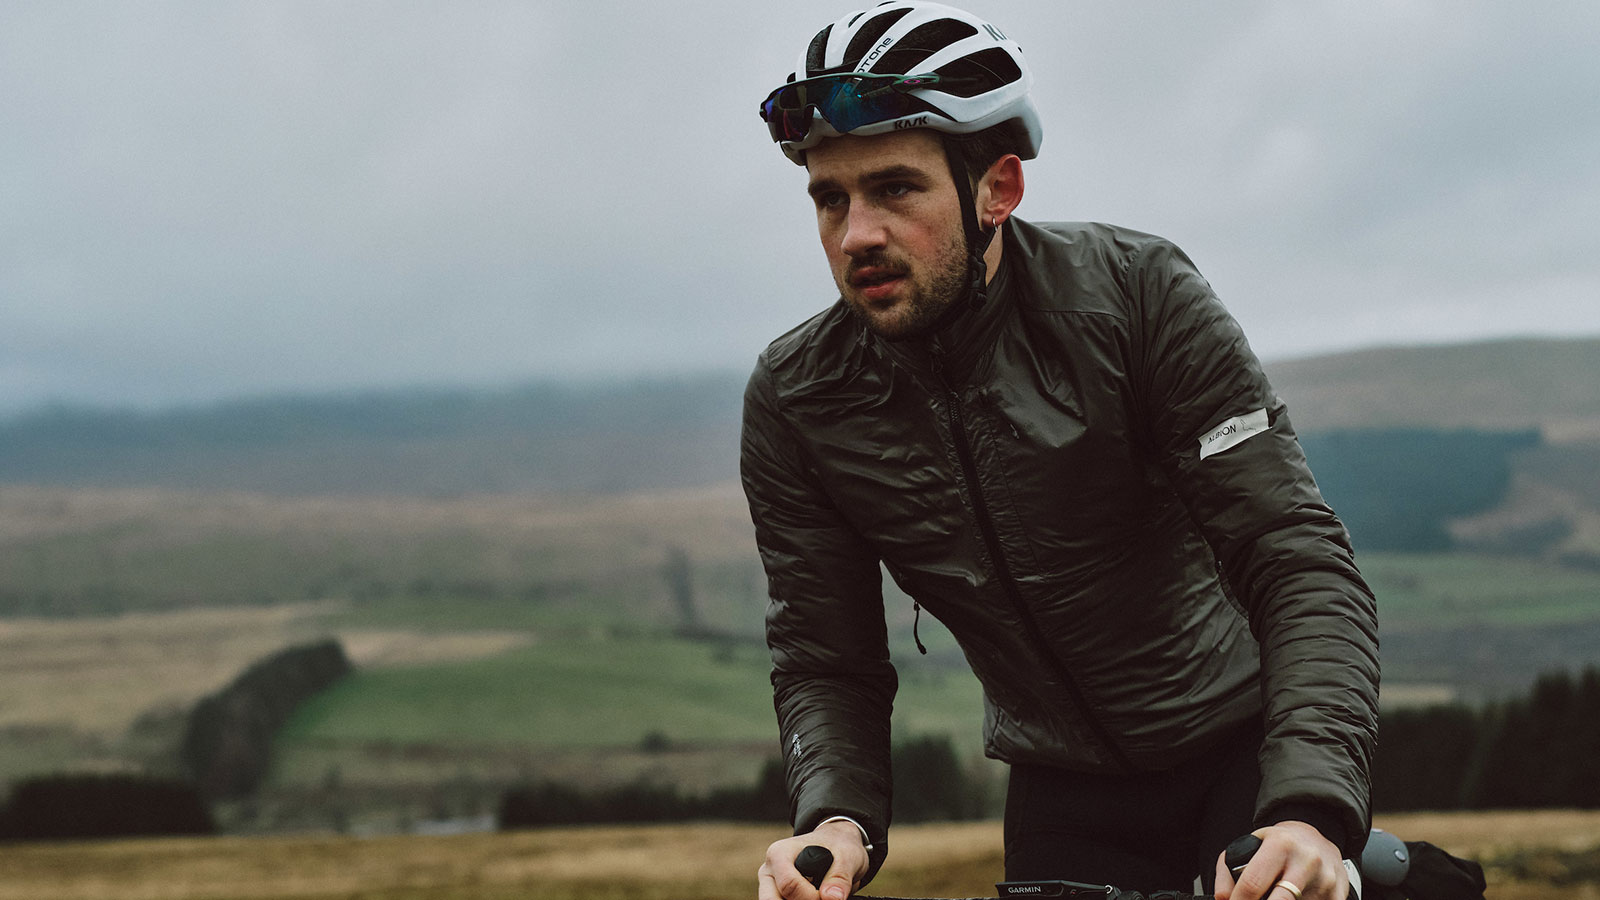 Albion Cycling's Spring 2023 Zoa Range of Technical Outdoor Clothing